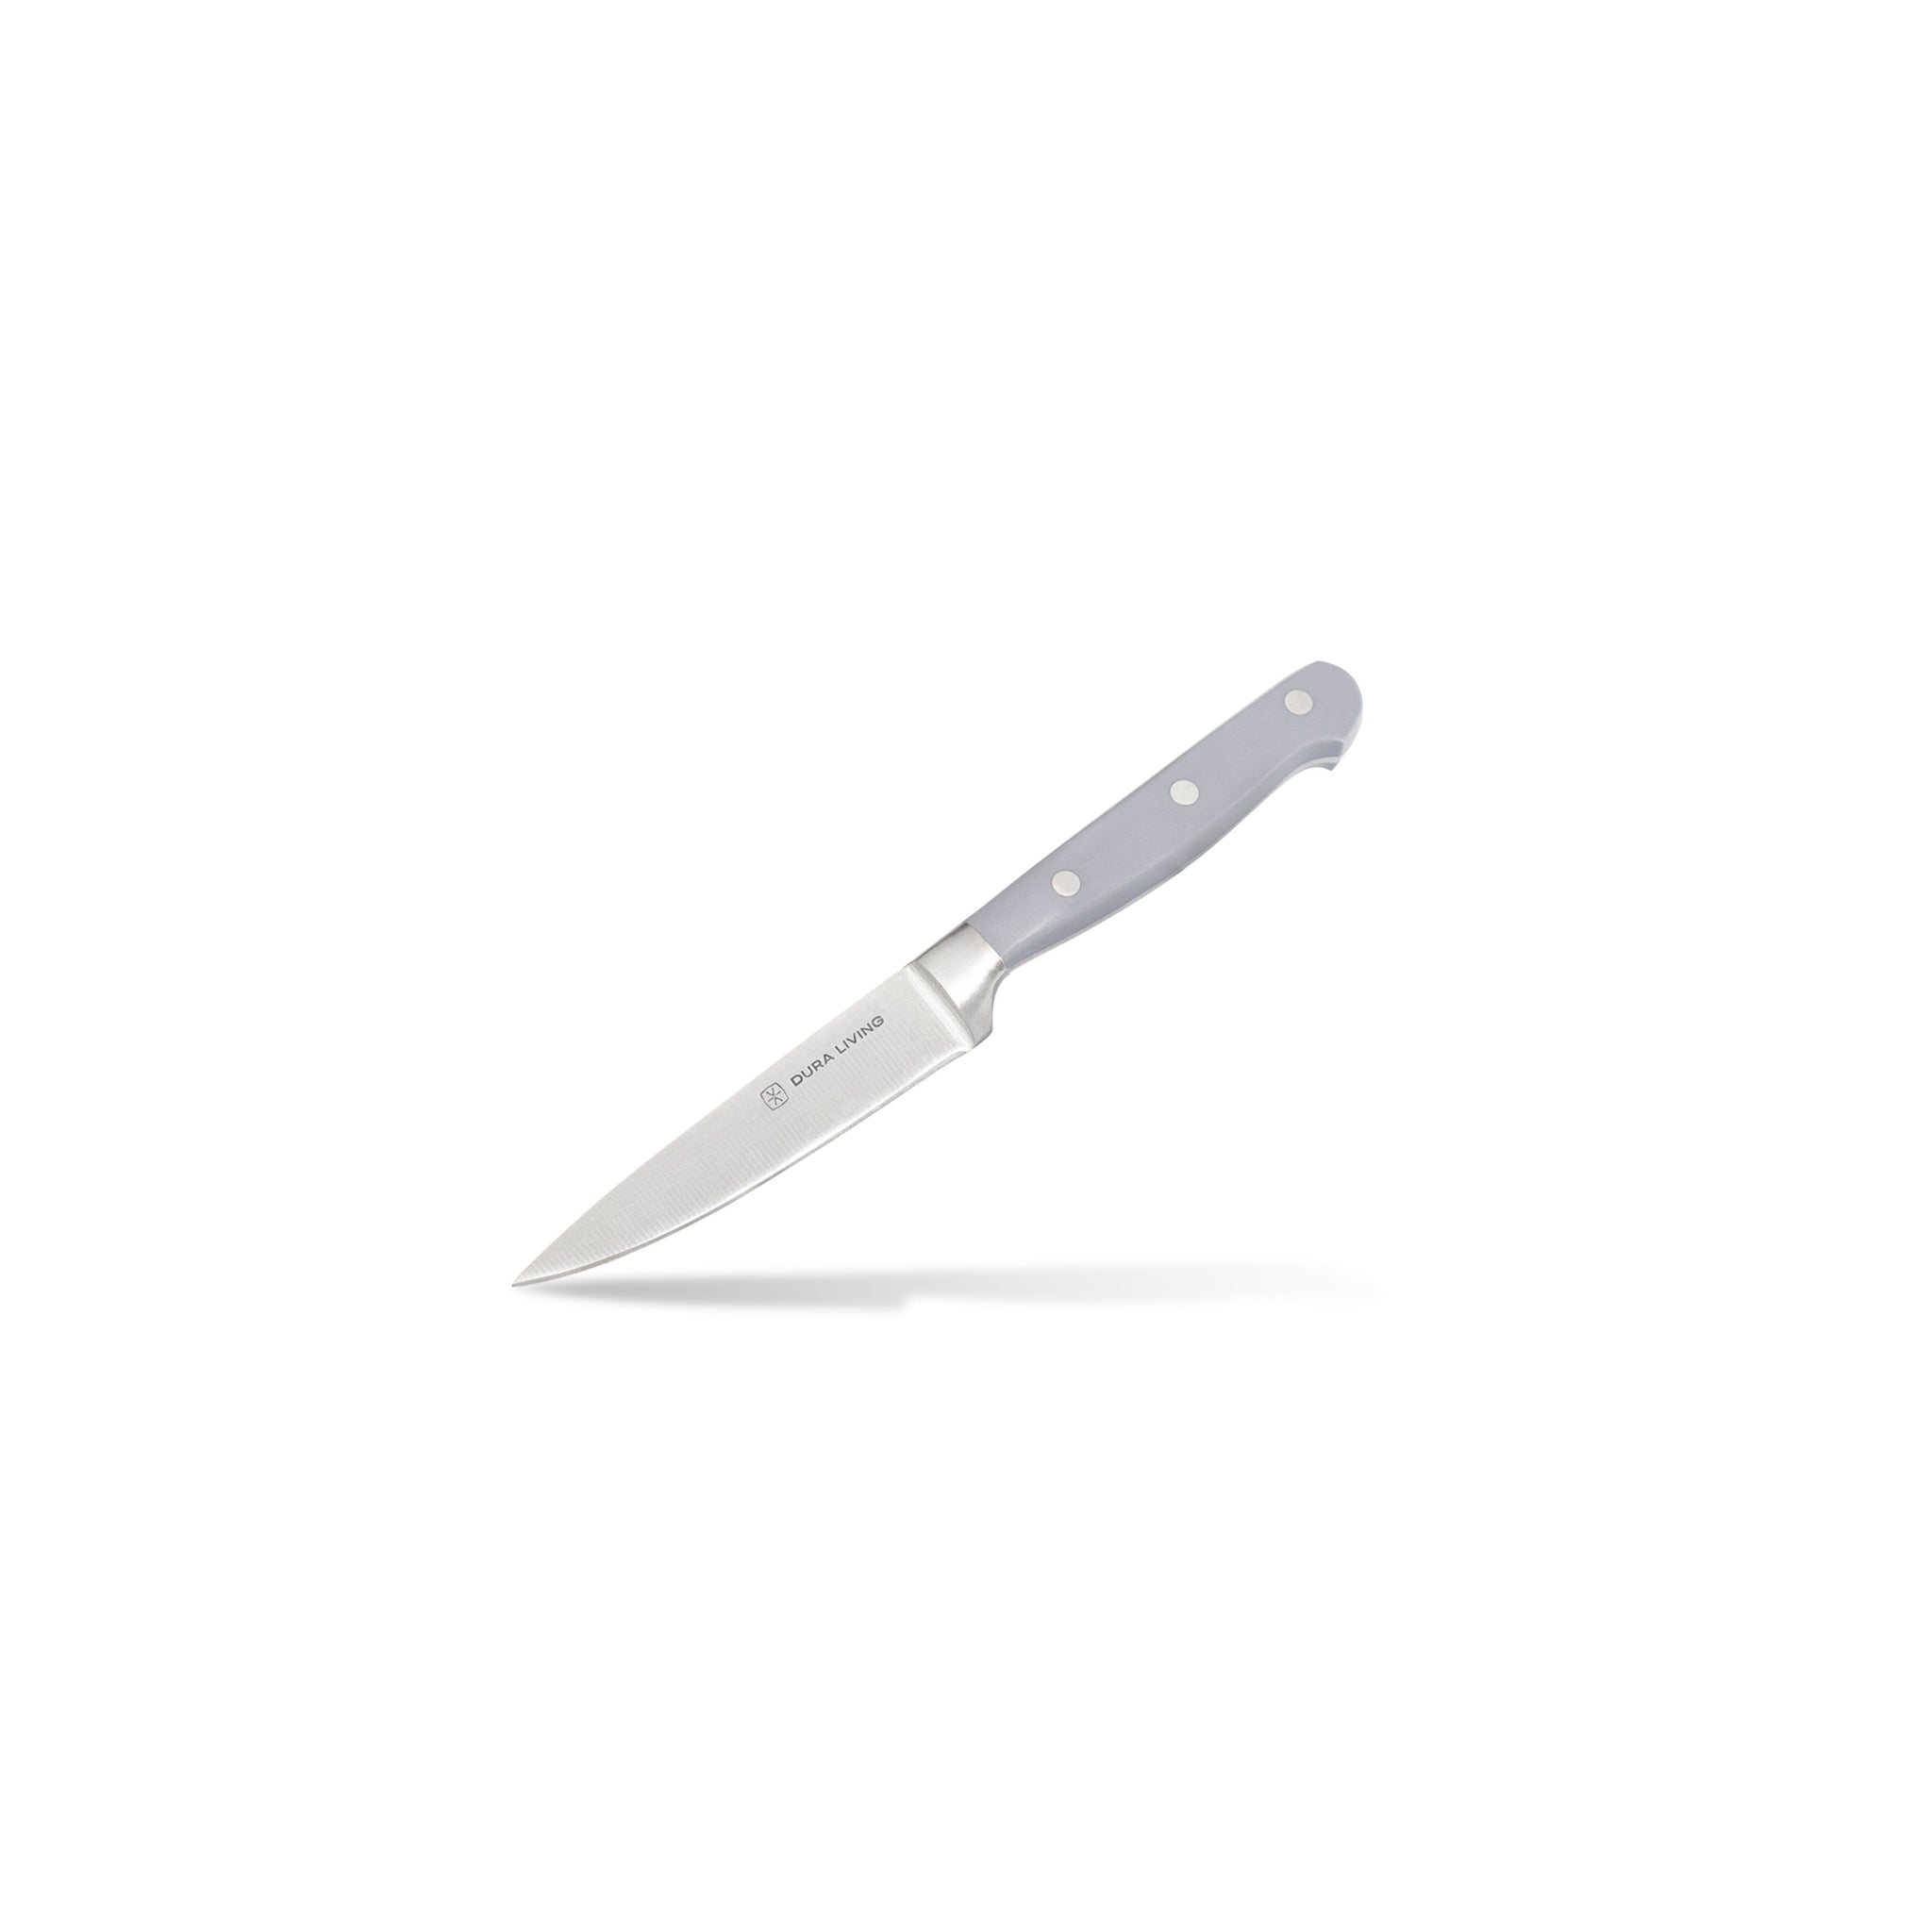 Superior 3.5 inch Paring Knife - Gray